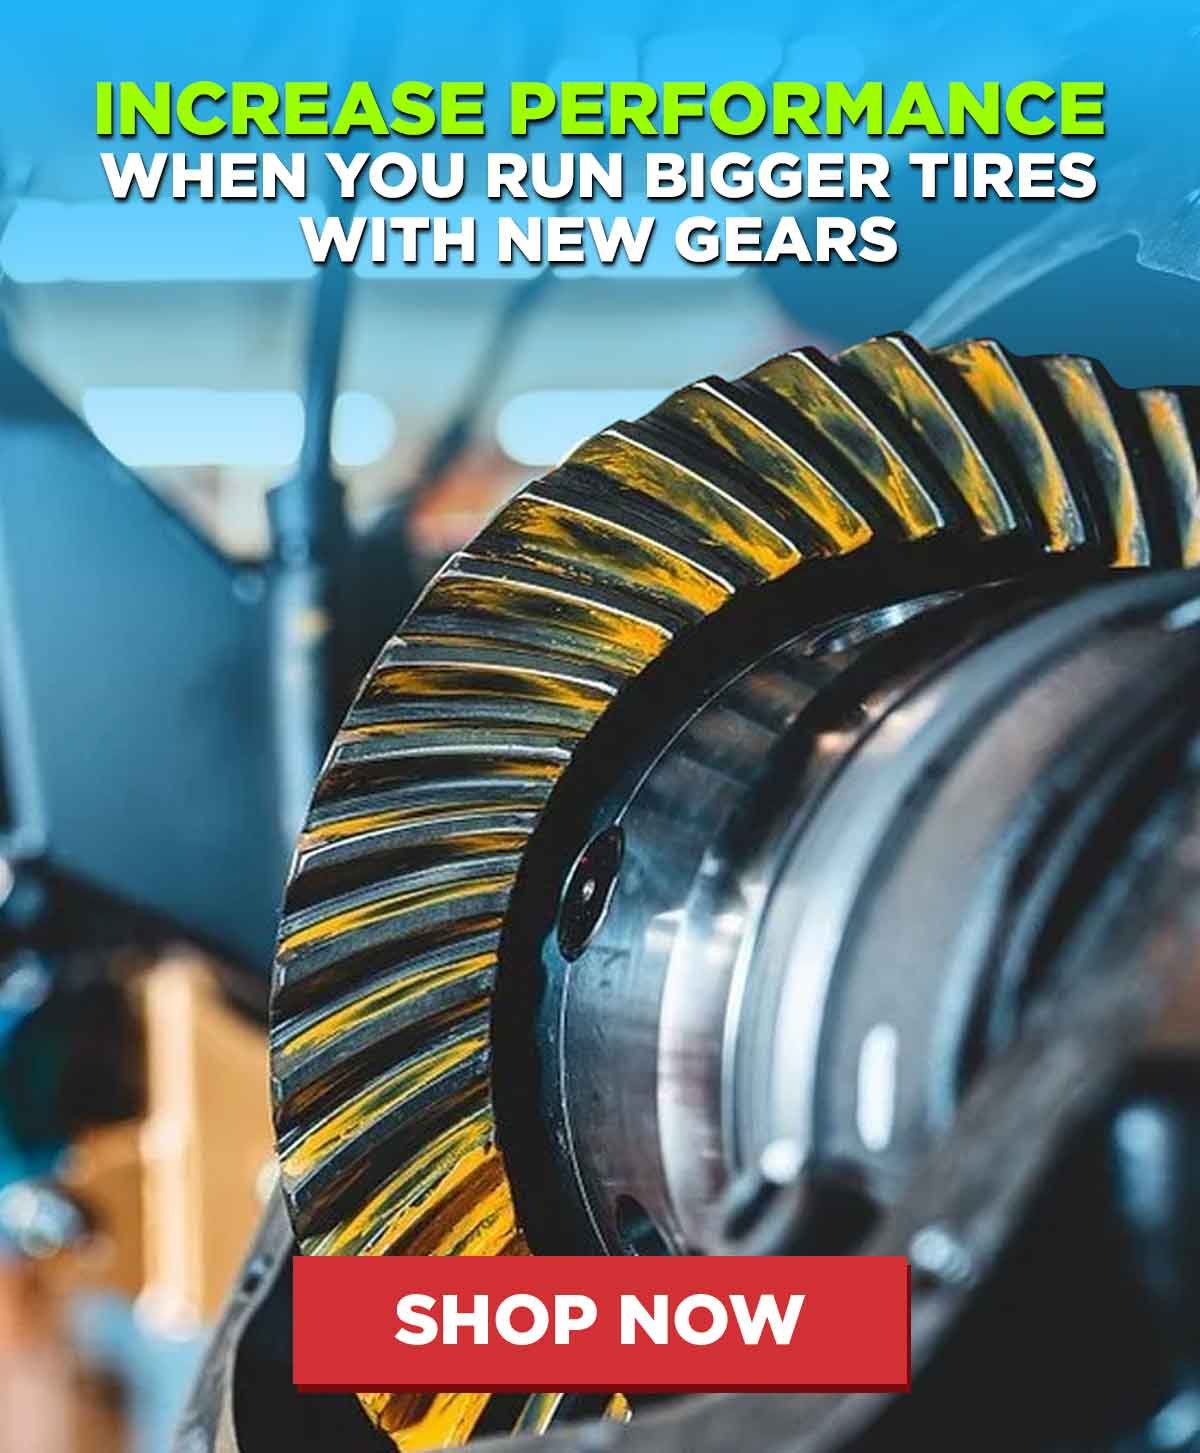 Increase Performance When You Run Bigger Tires With New Gears